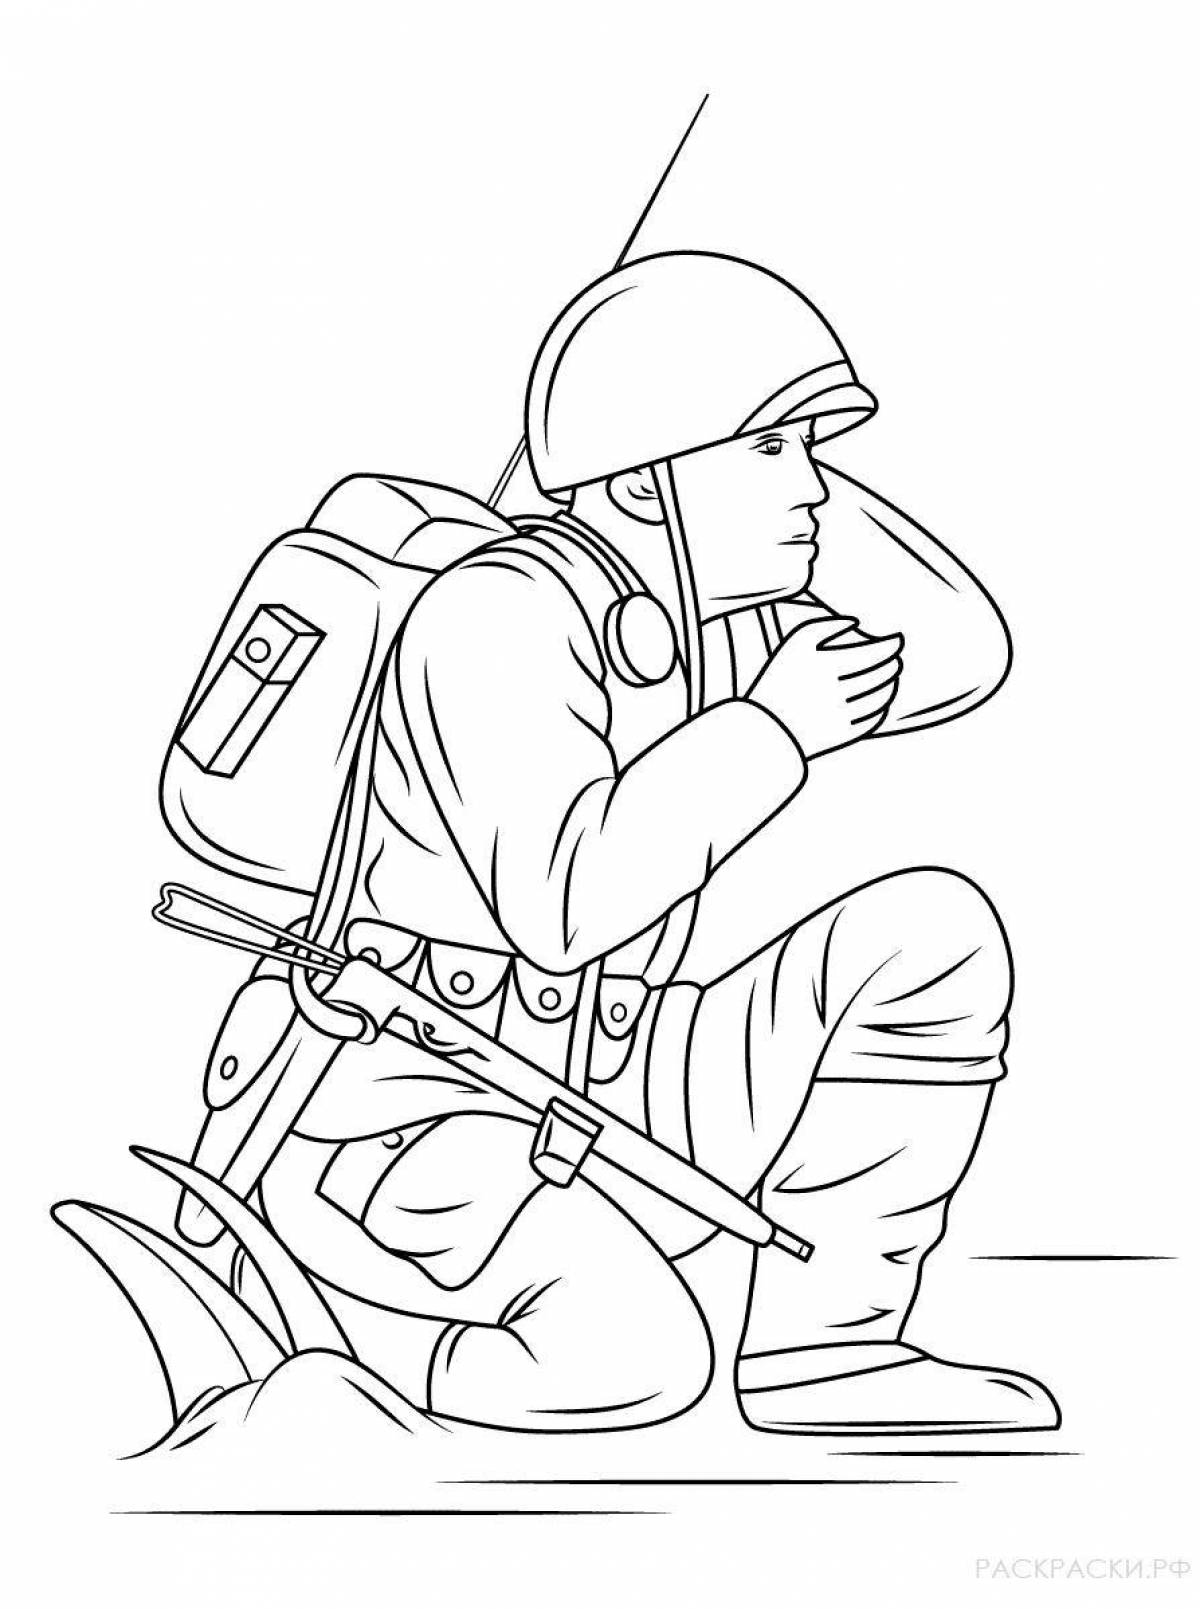 Colorful military profession coloring book for preschoolers